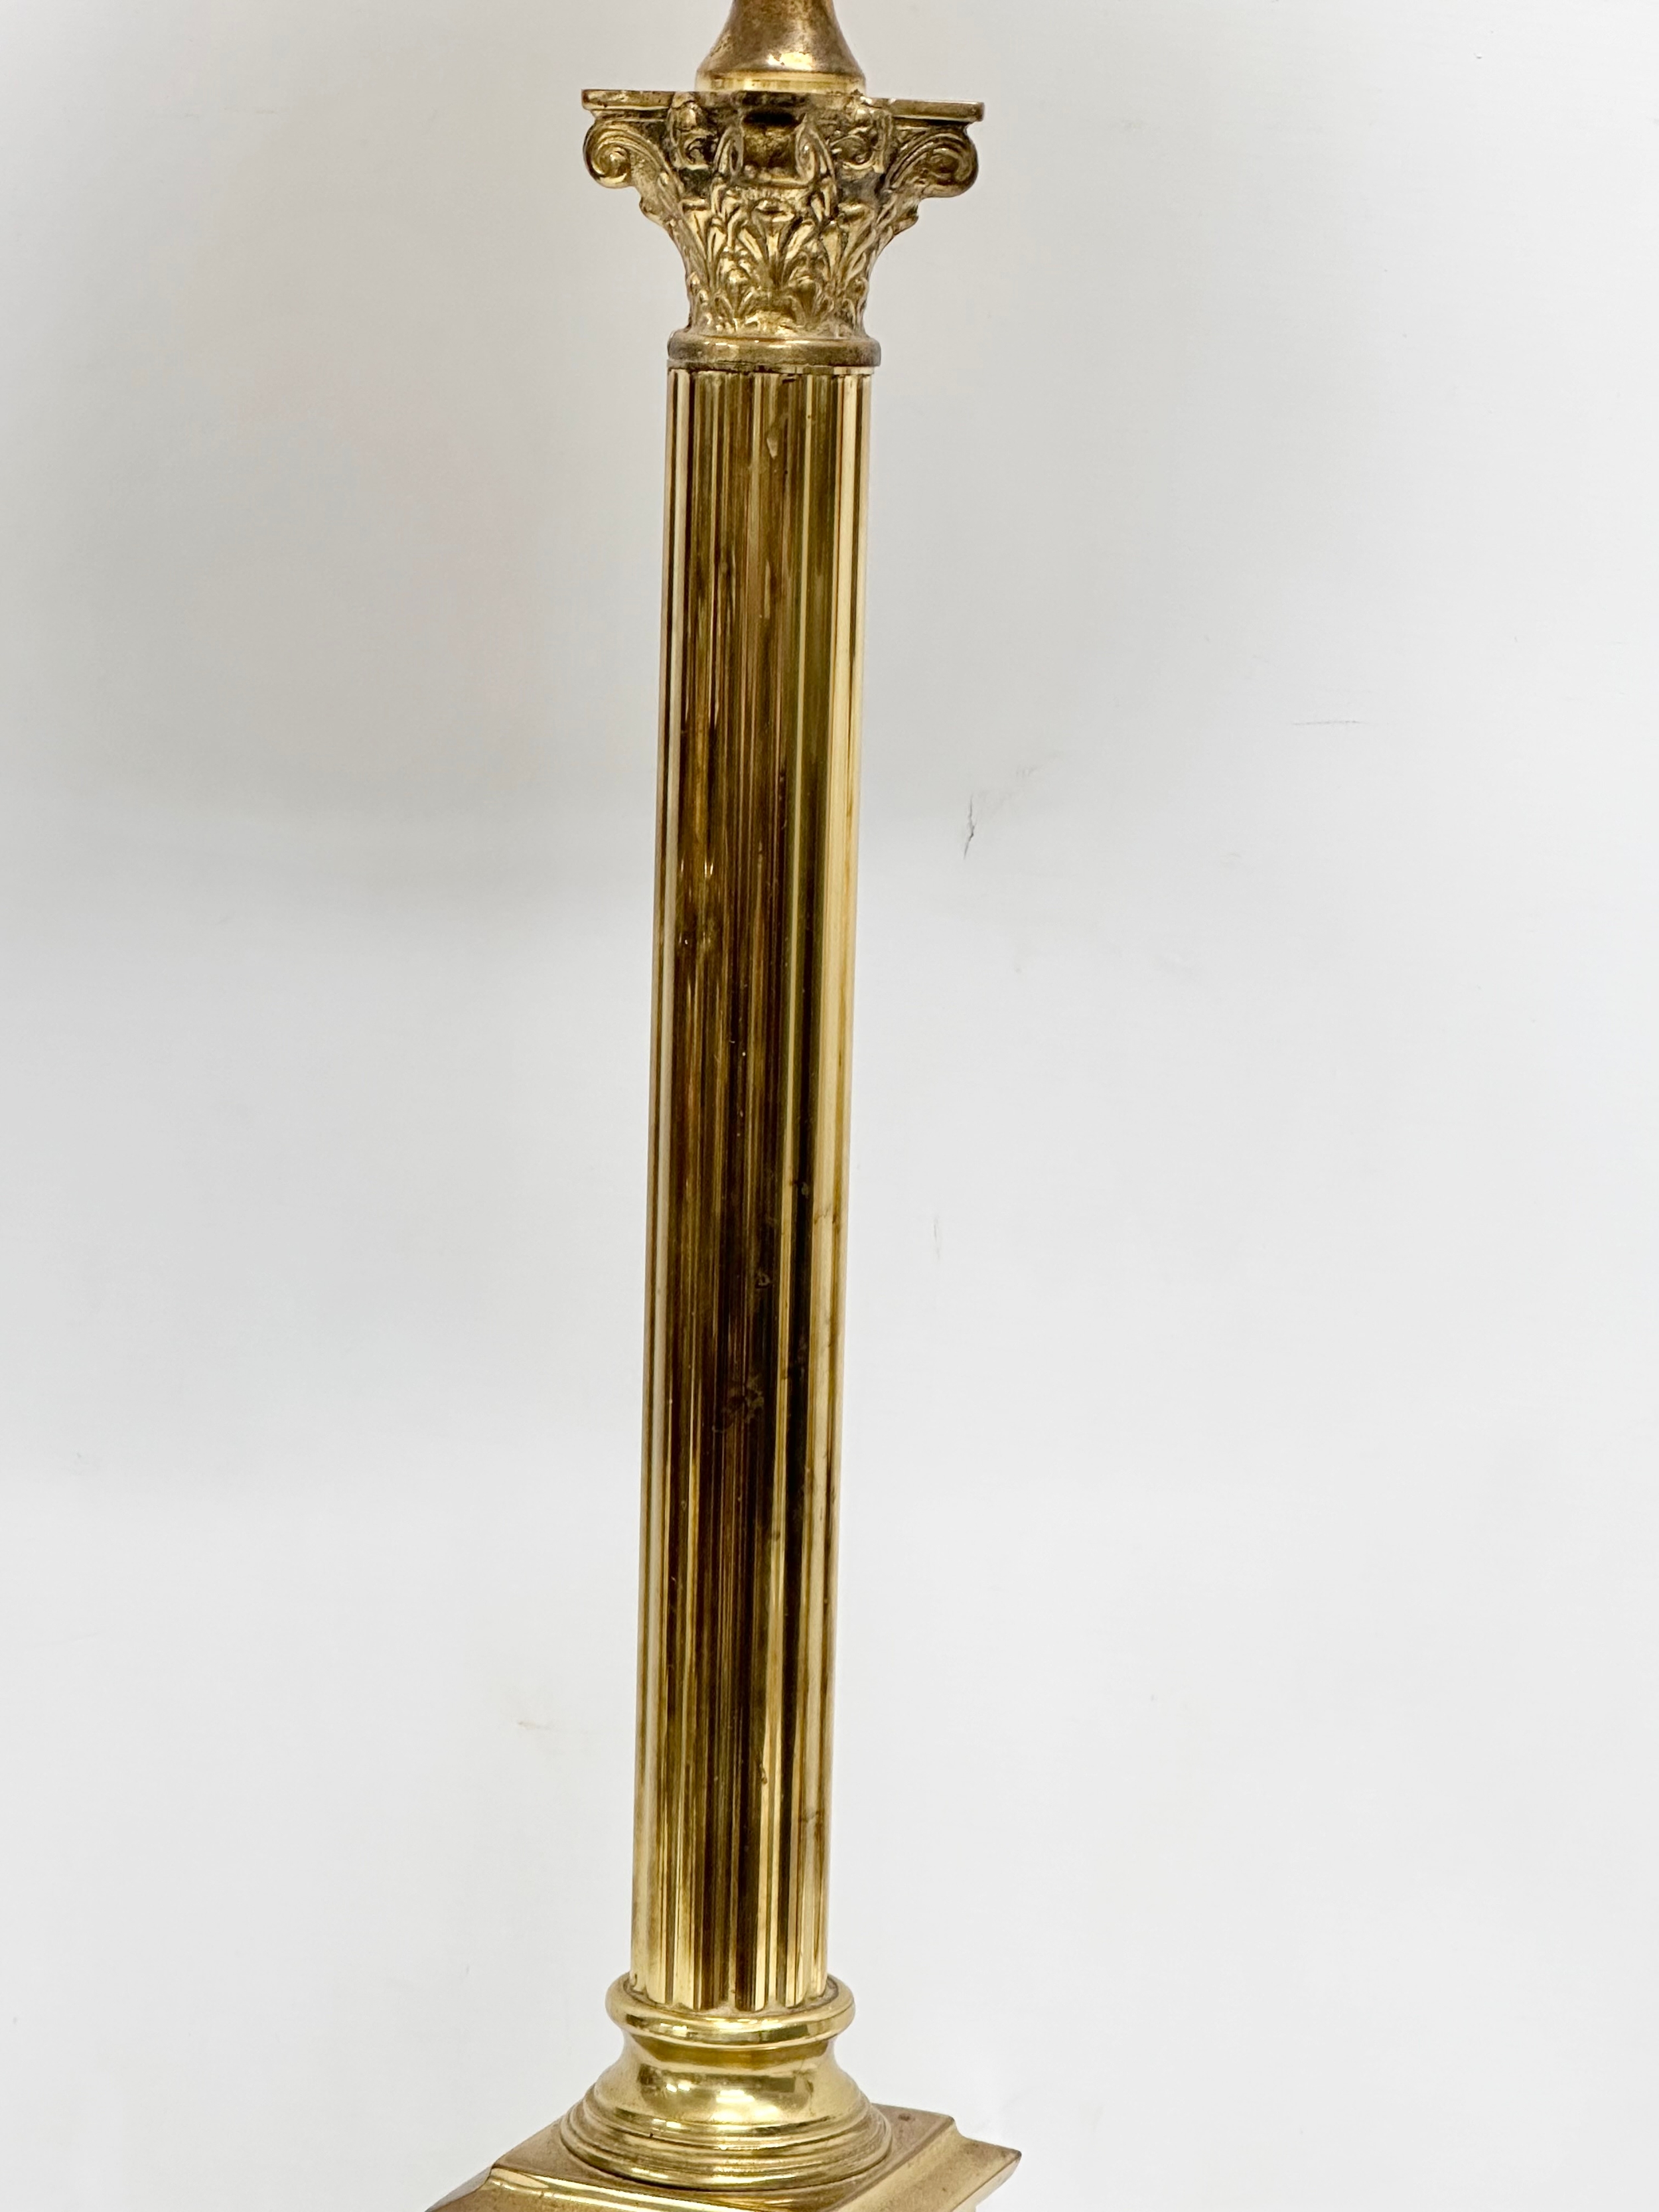 A large 20th Century brass table lamp with Corinthian column. Base measures 17x17x64cm - Image 3 of 4